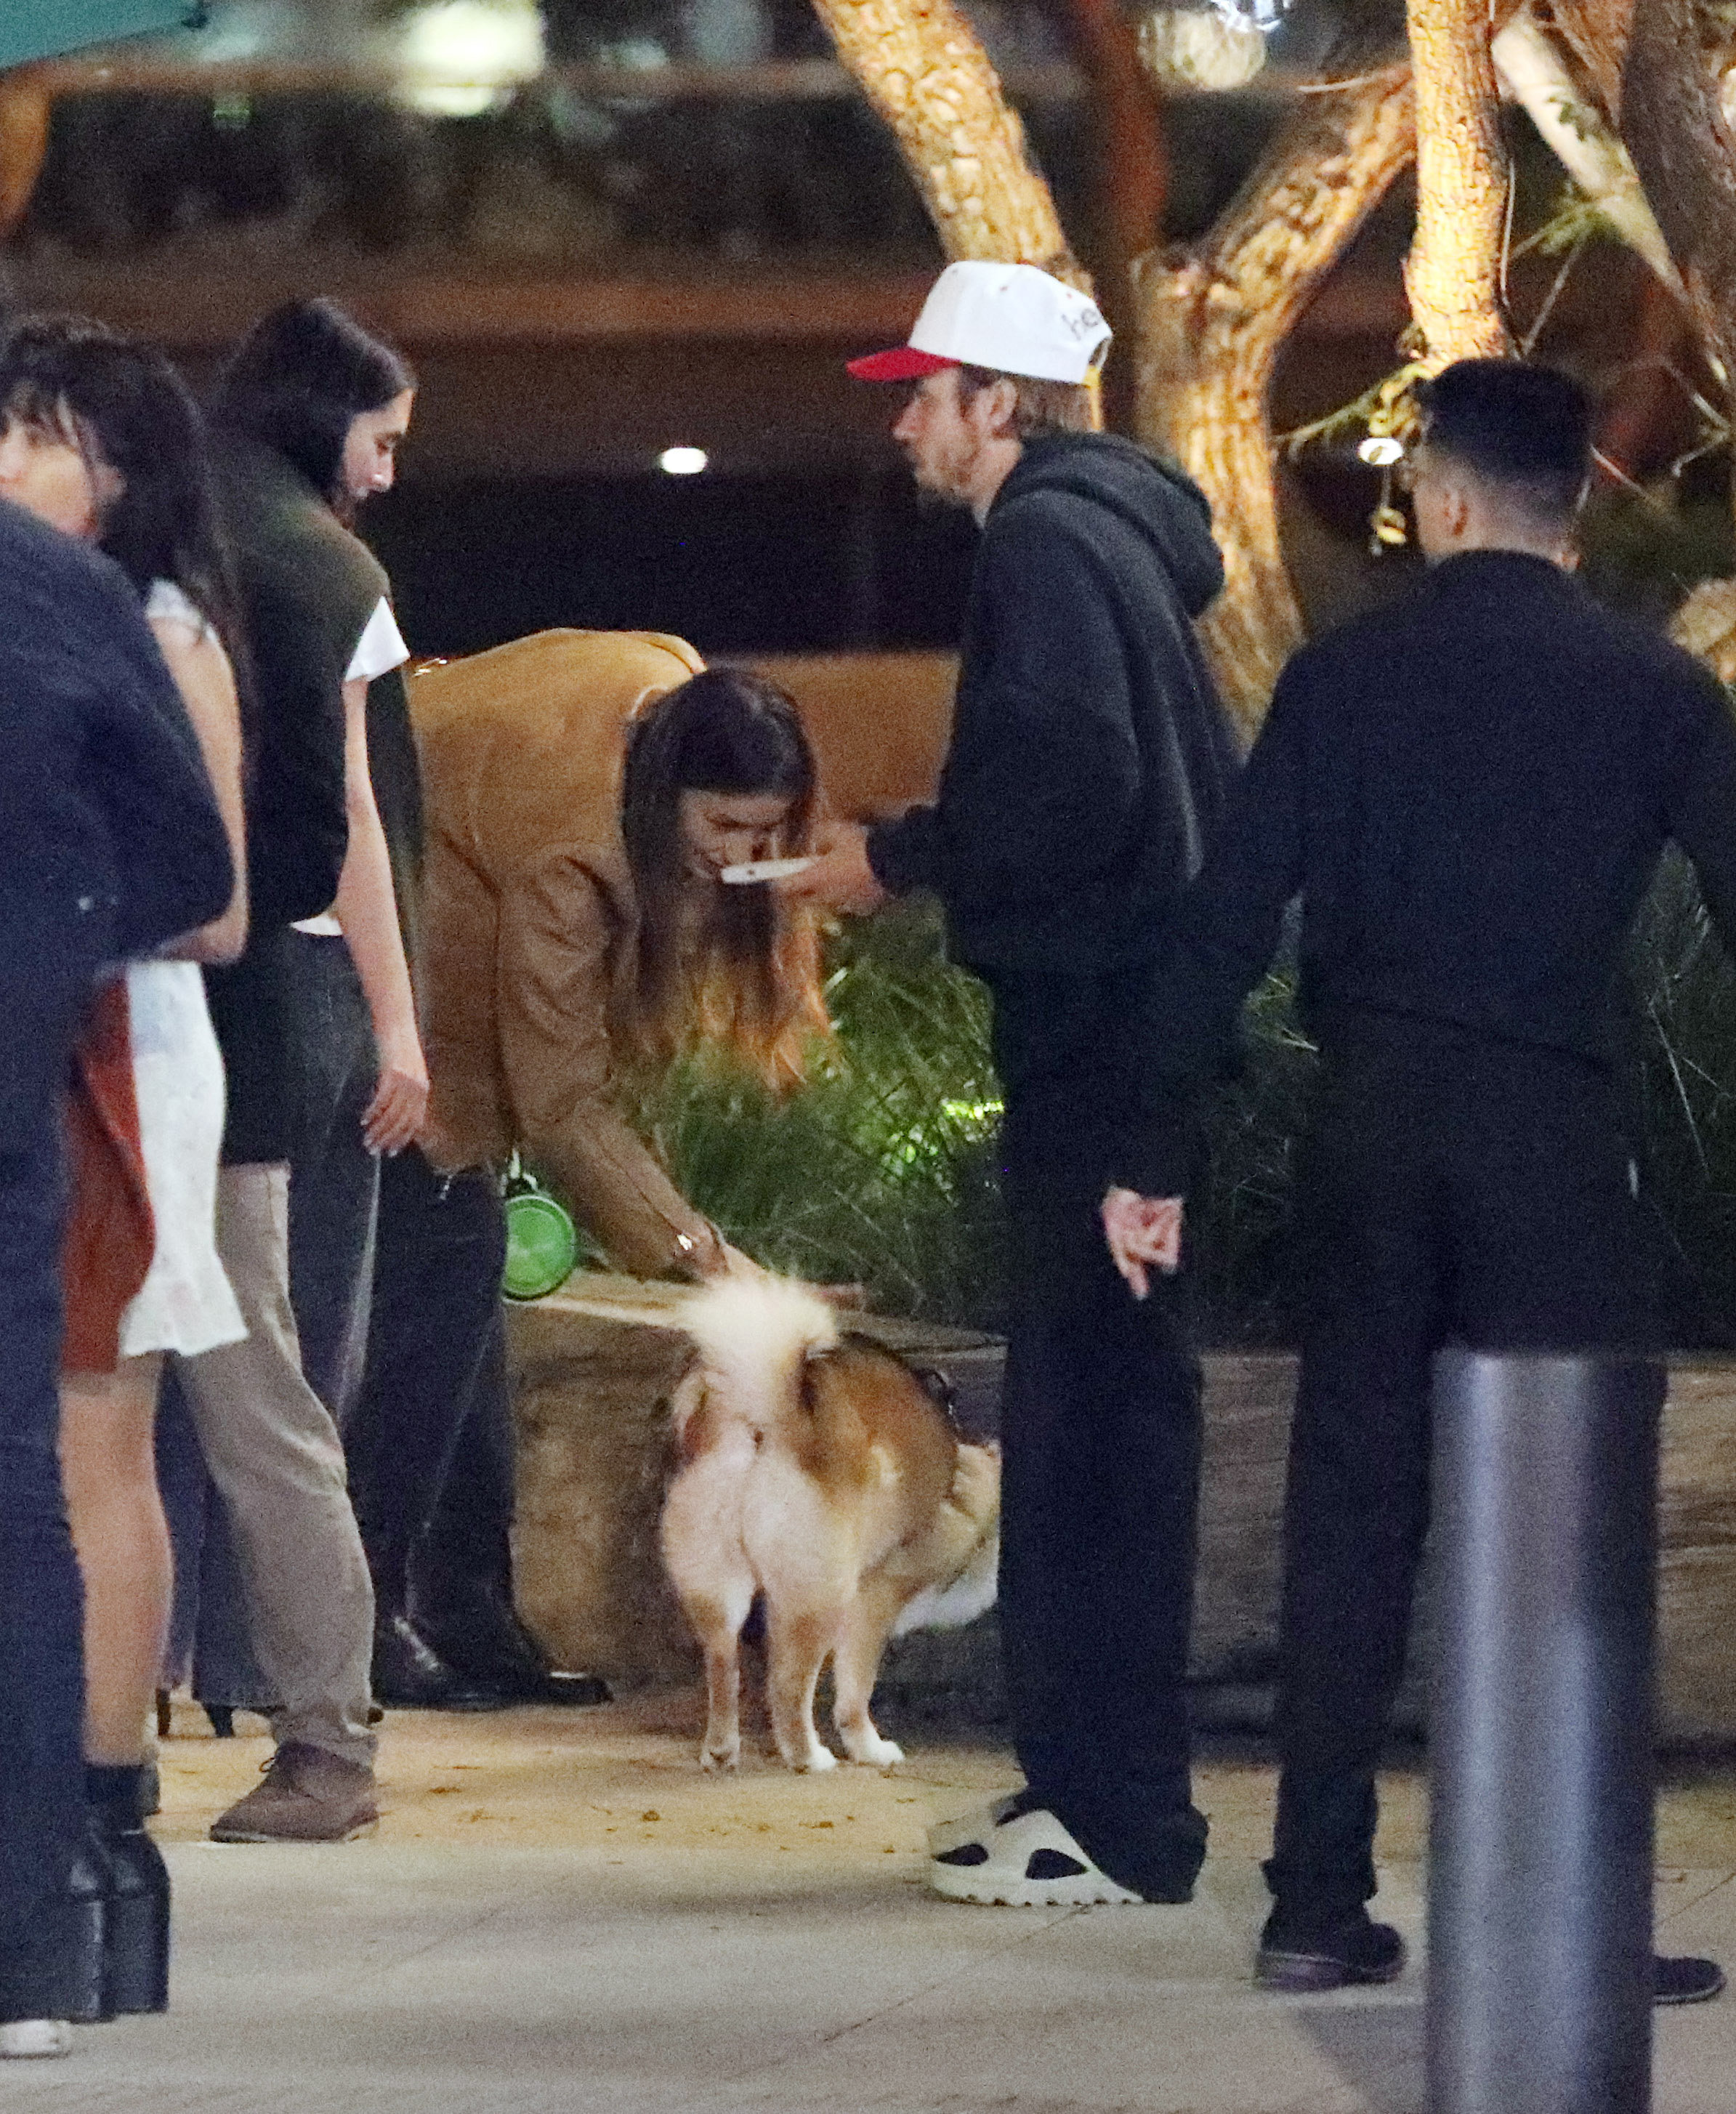 Photos showed the duo reunited with their friends, as Justin socialized with the group